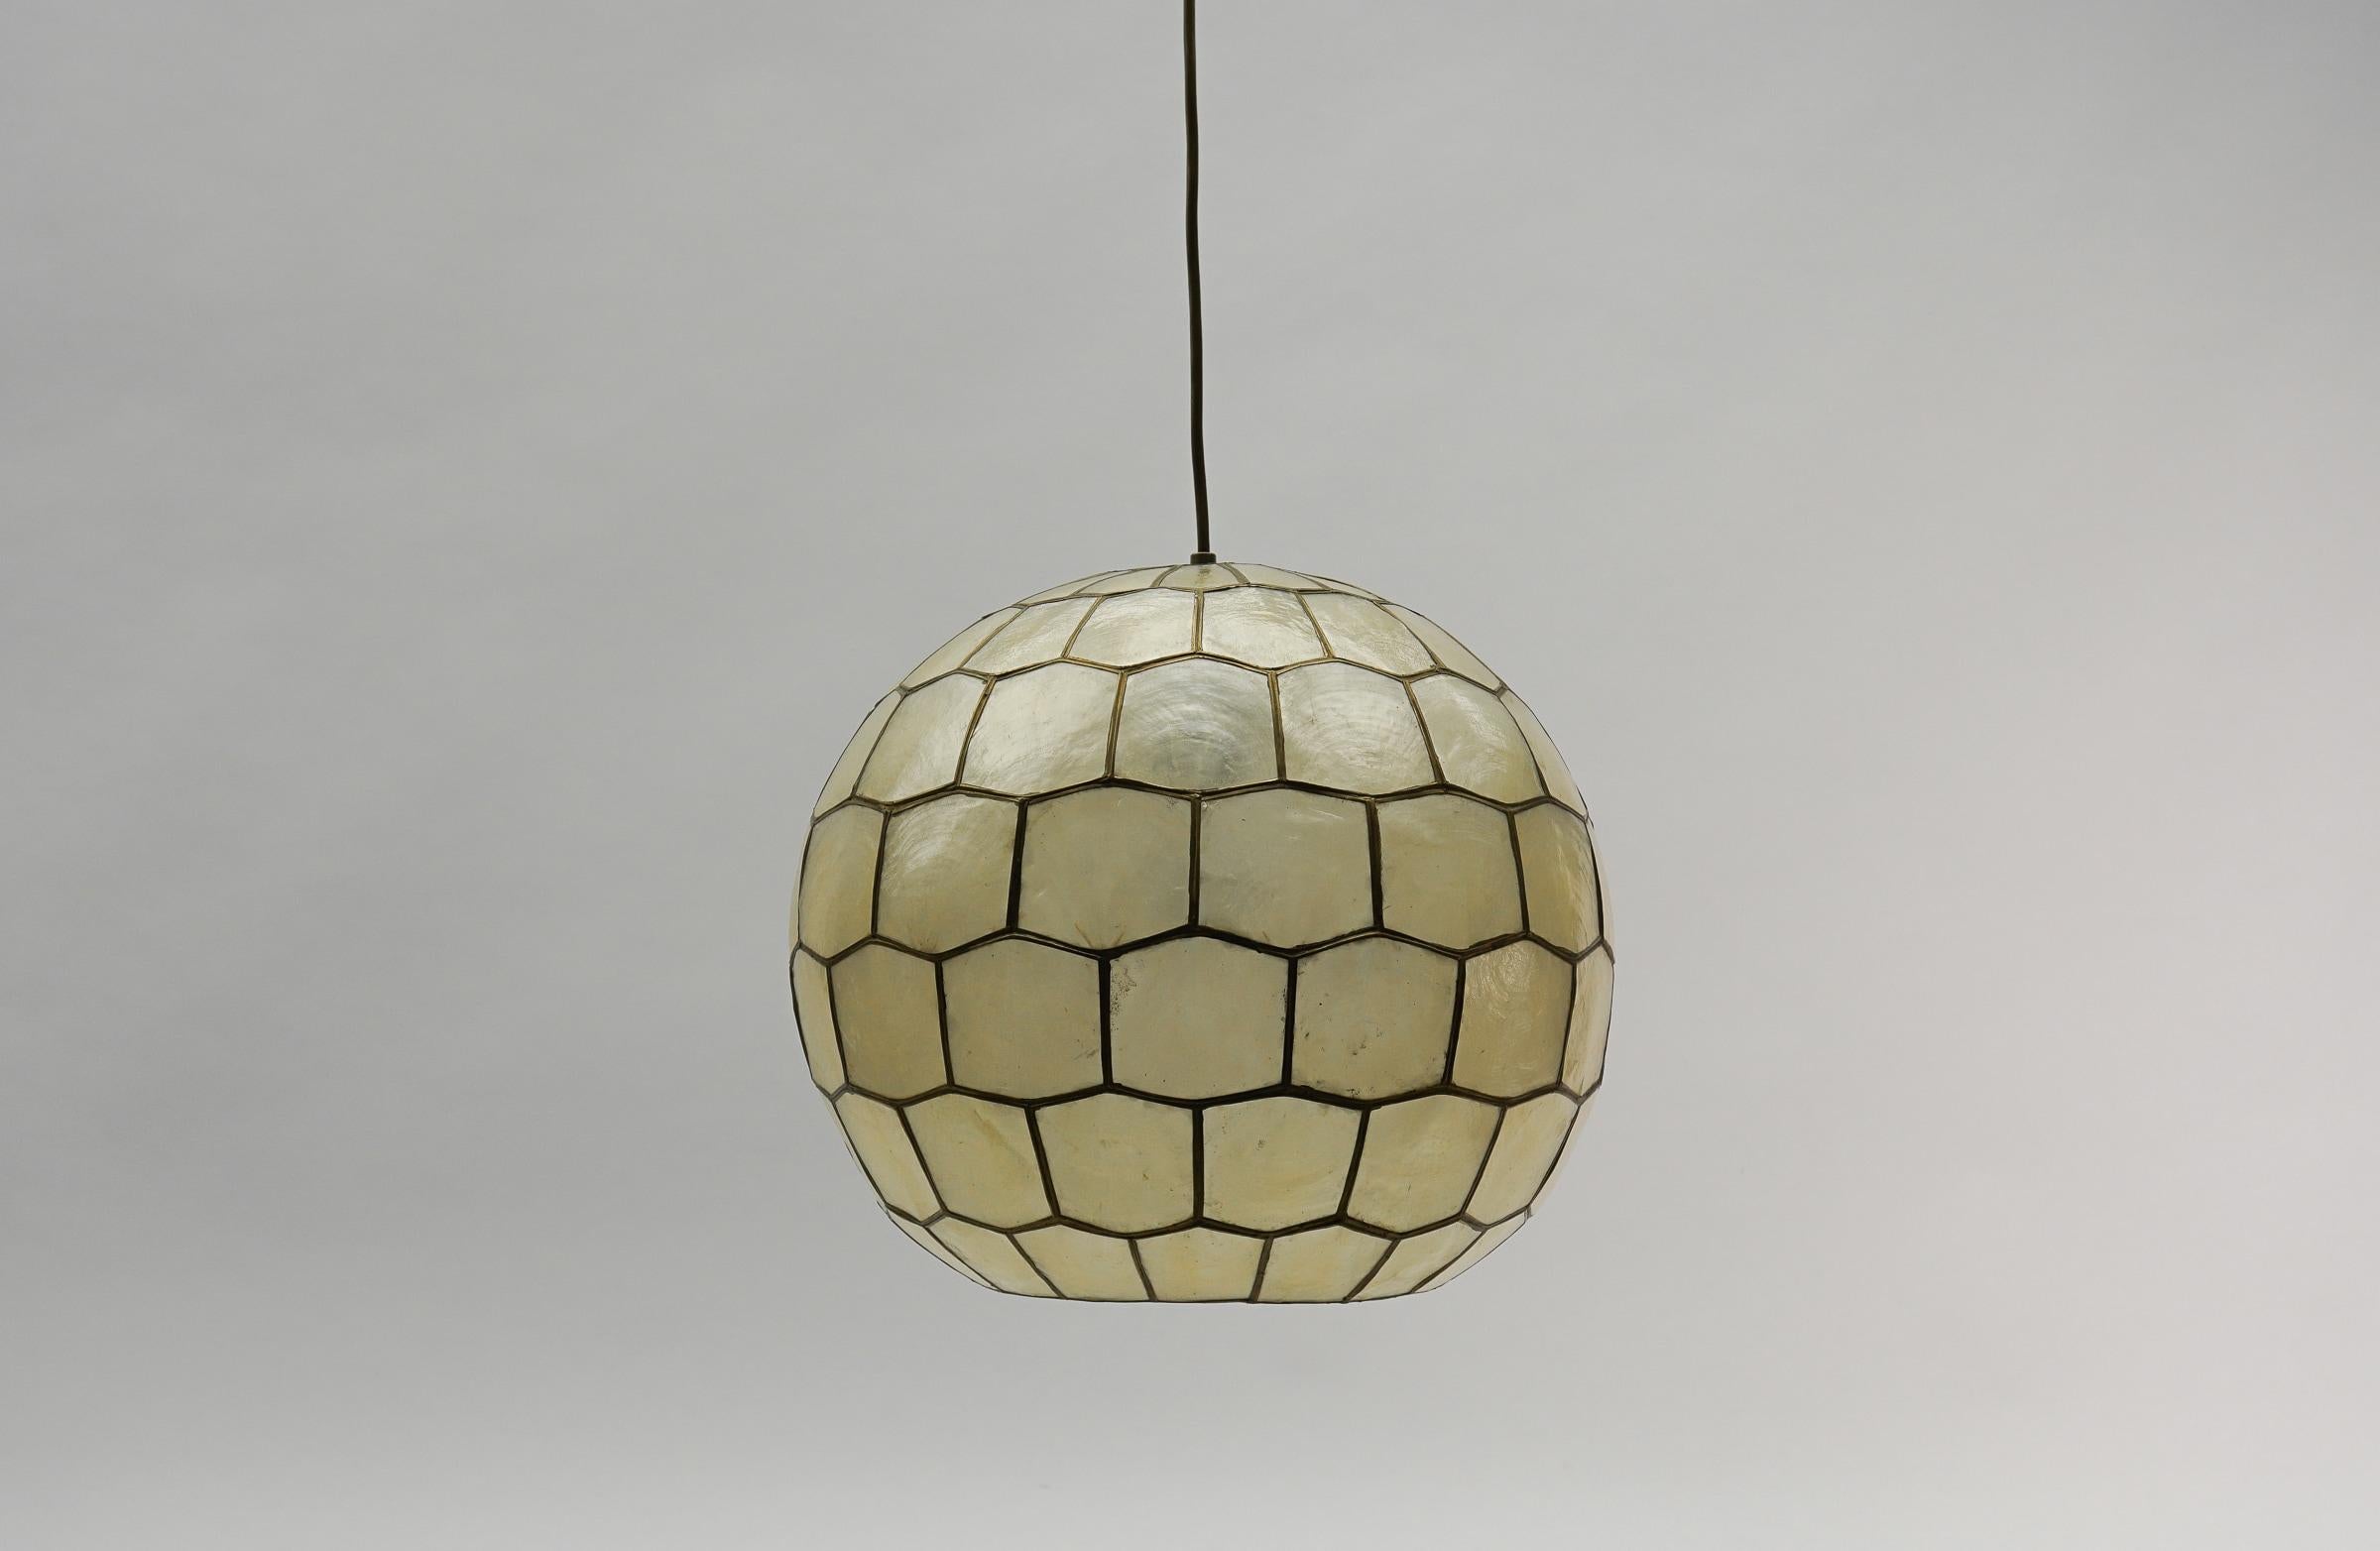 Metal Lovely Mother-of-Pearl Ceiling Ball Lamp, 1960s For Sale